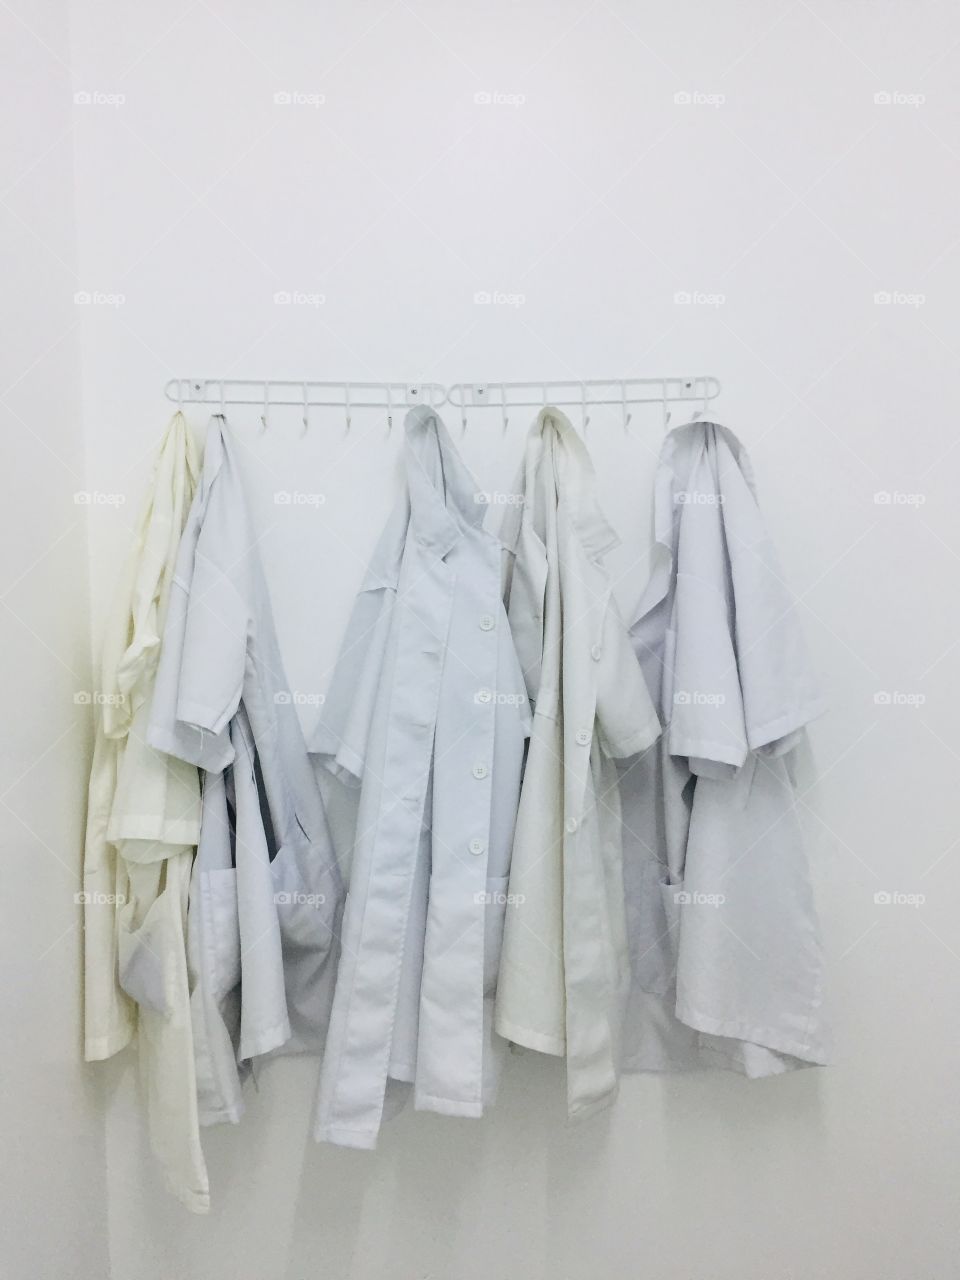 Daily routine as researcher, take up your lab coat and continue your research every day. 